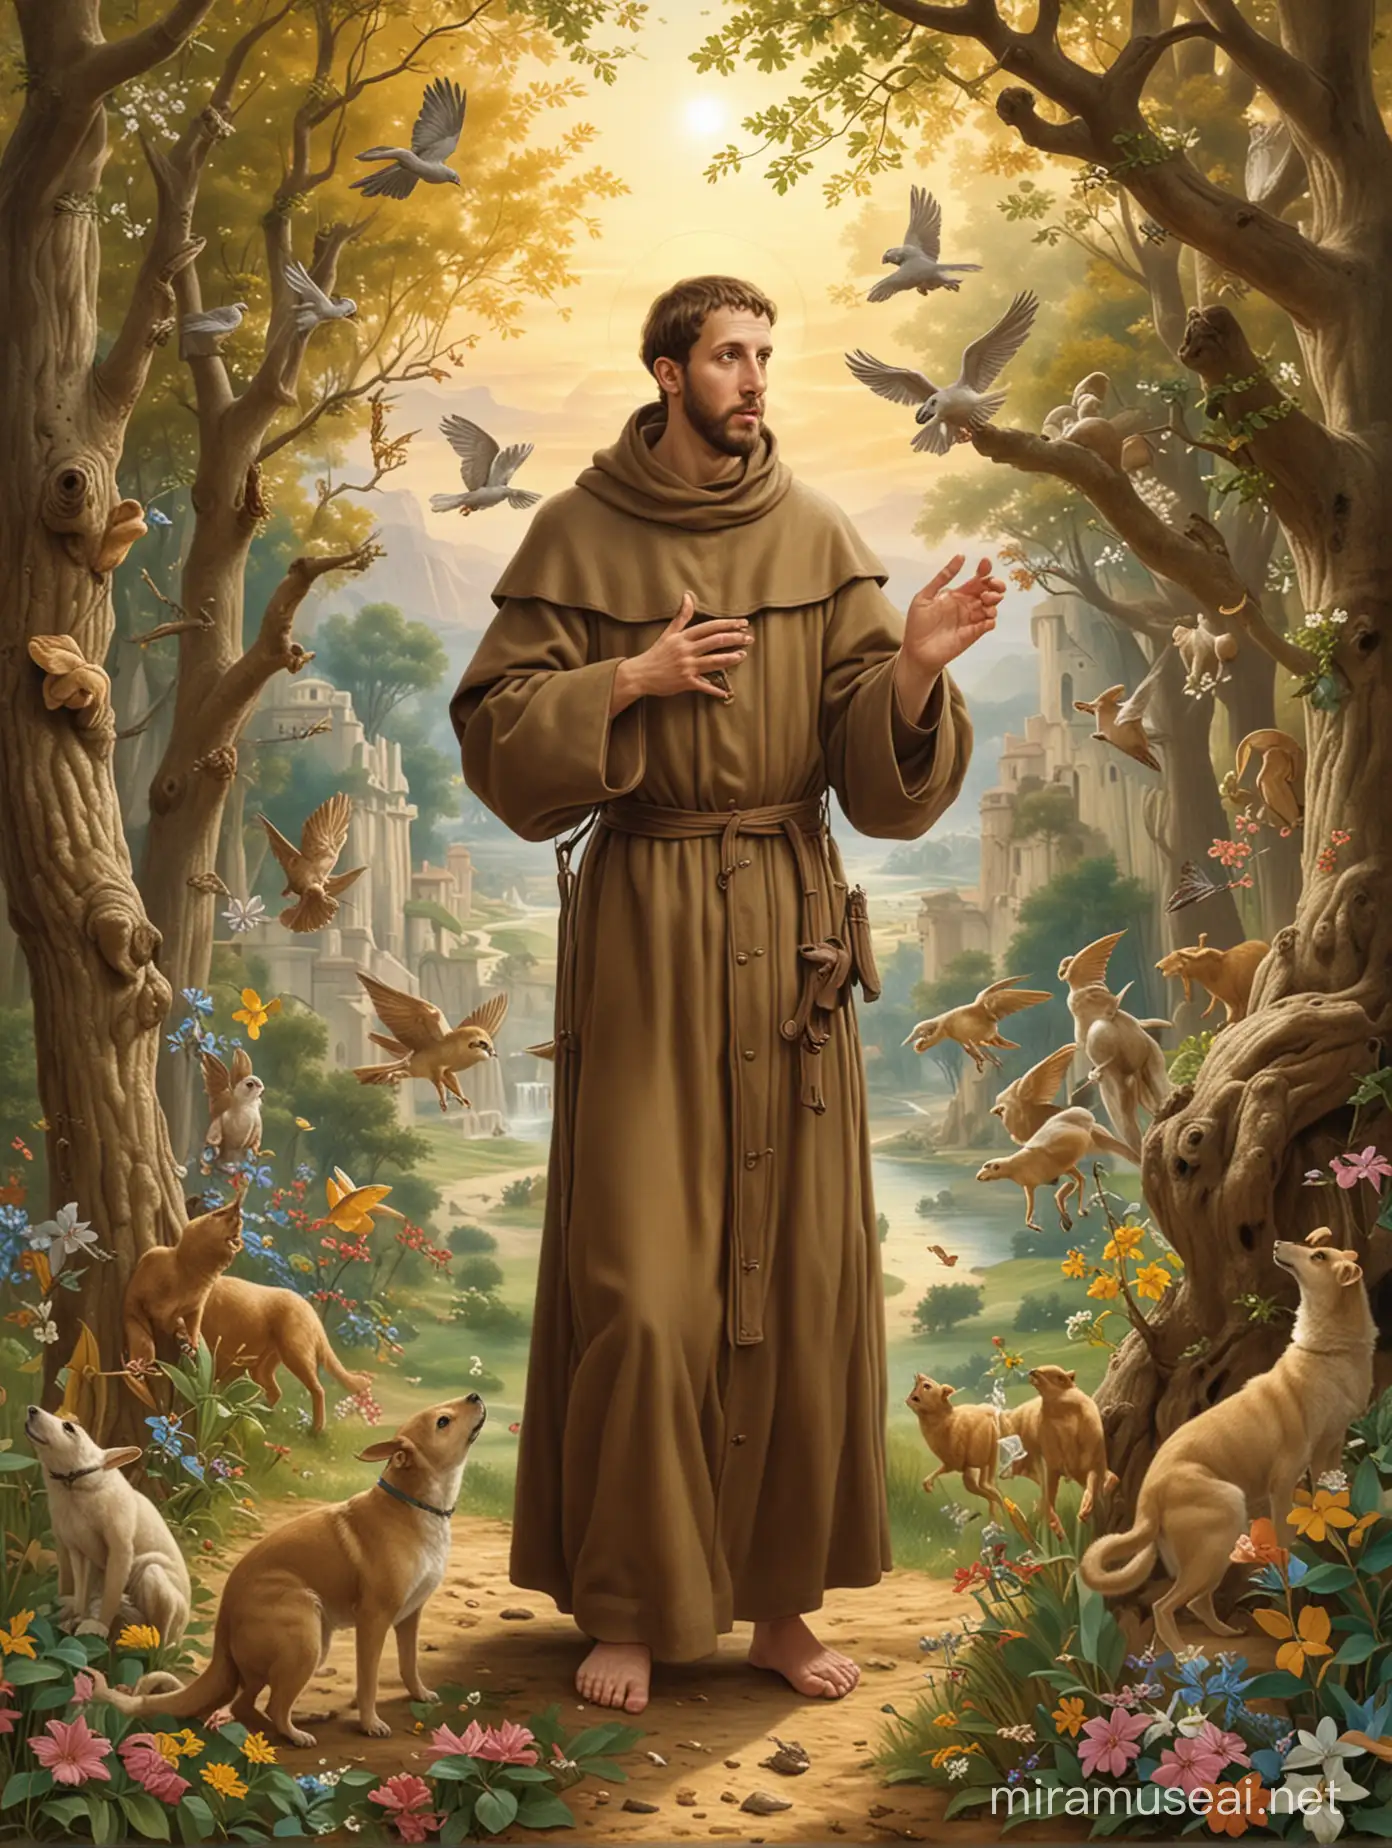 Saint Francis of Assisi and the nature